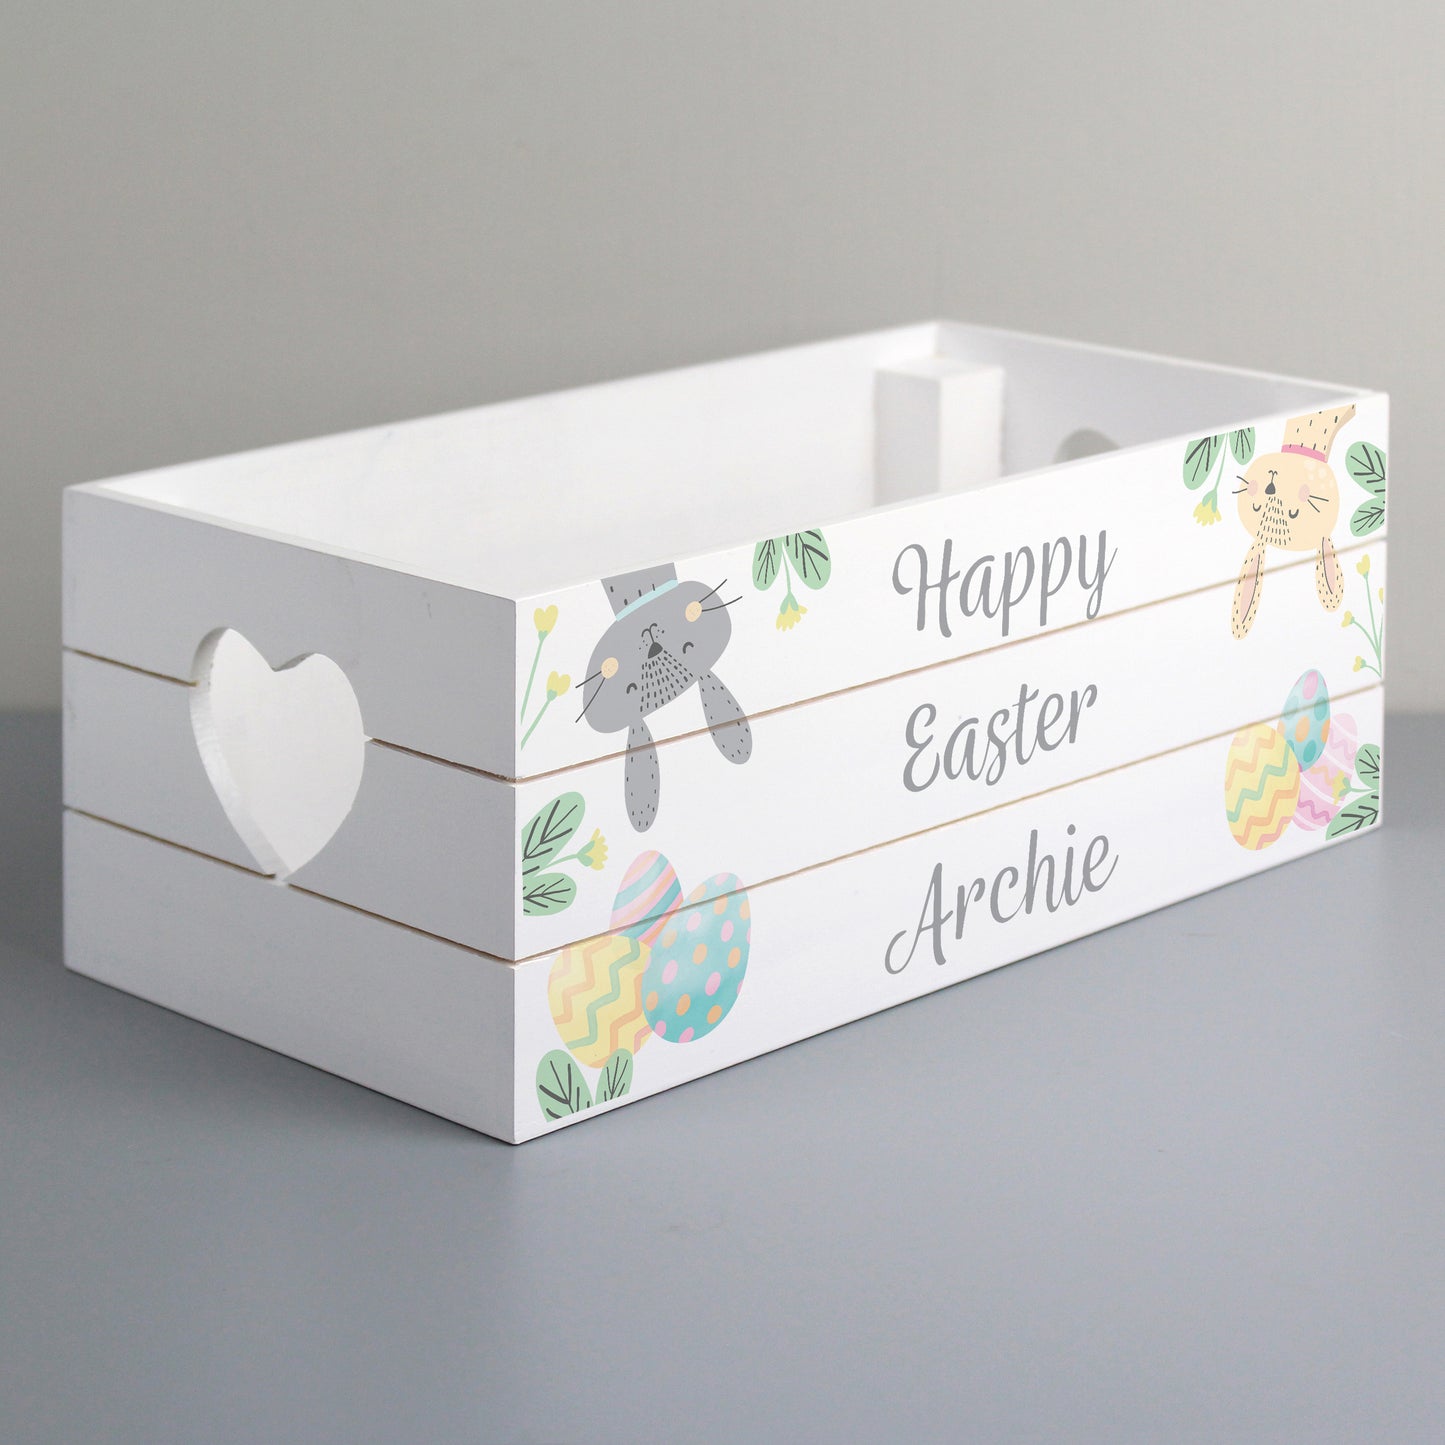 Personalised Easter White Wooden Crate - Personalise It!